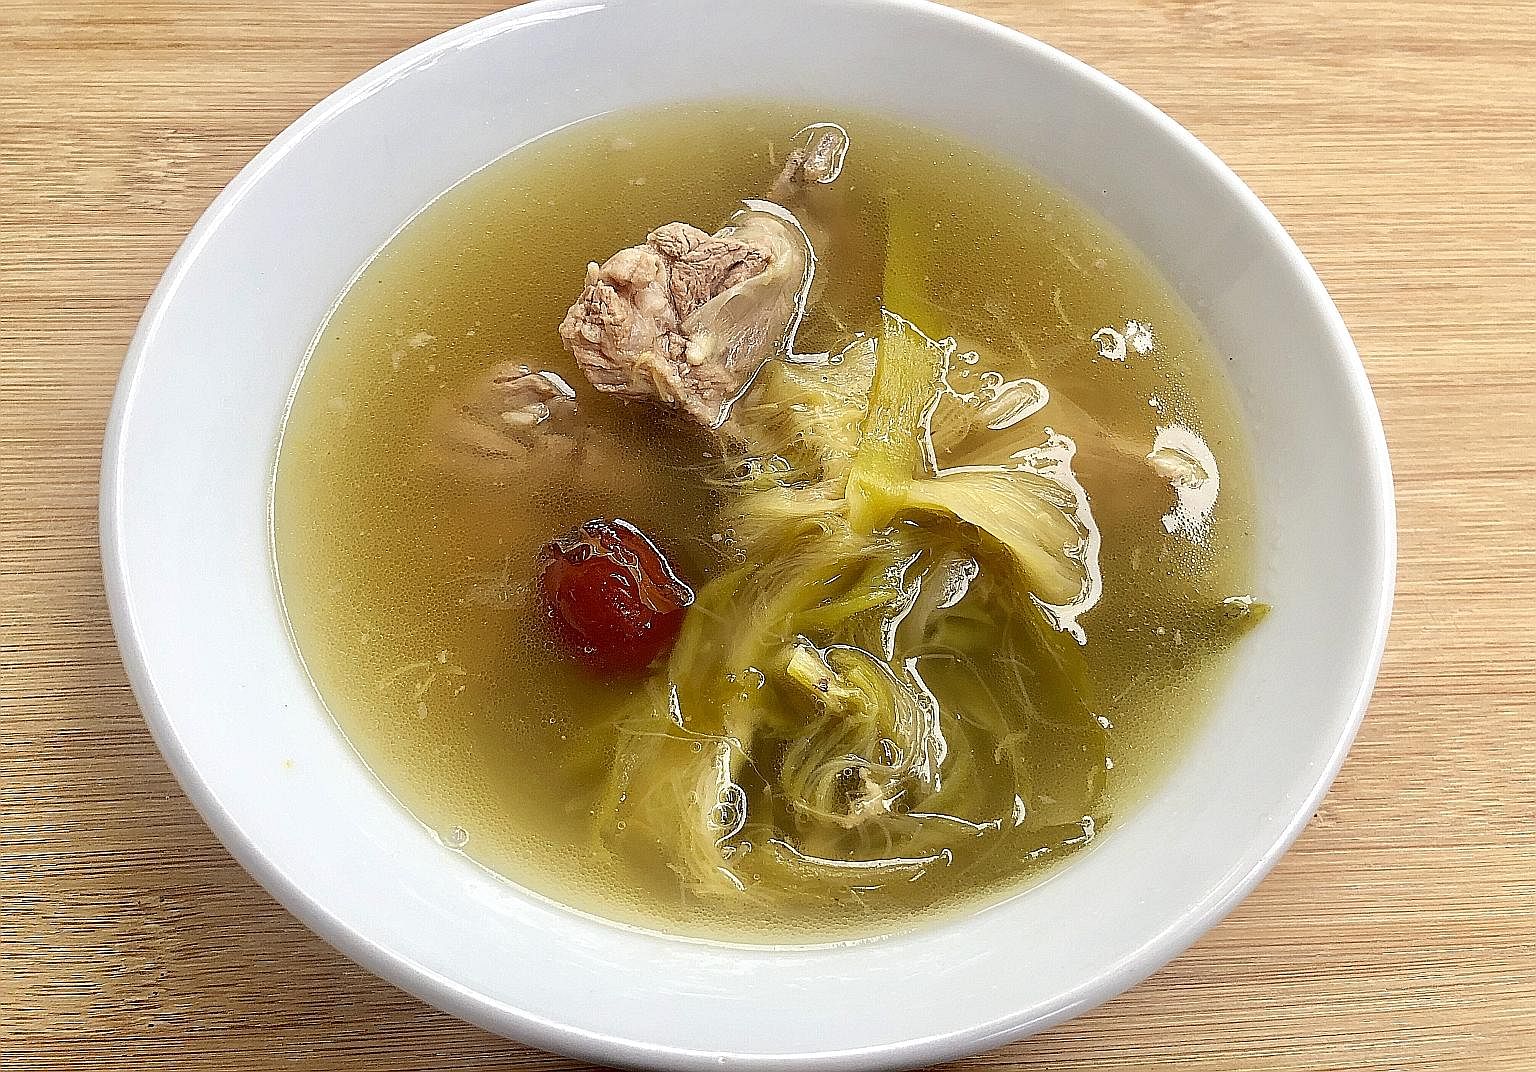 Sold in dried form, the ba wang hua - which is used in this soup (left) - is believed to help with reducing heat in the lungs in traditional Chinese medicine.